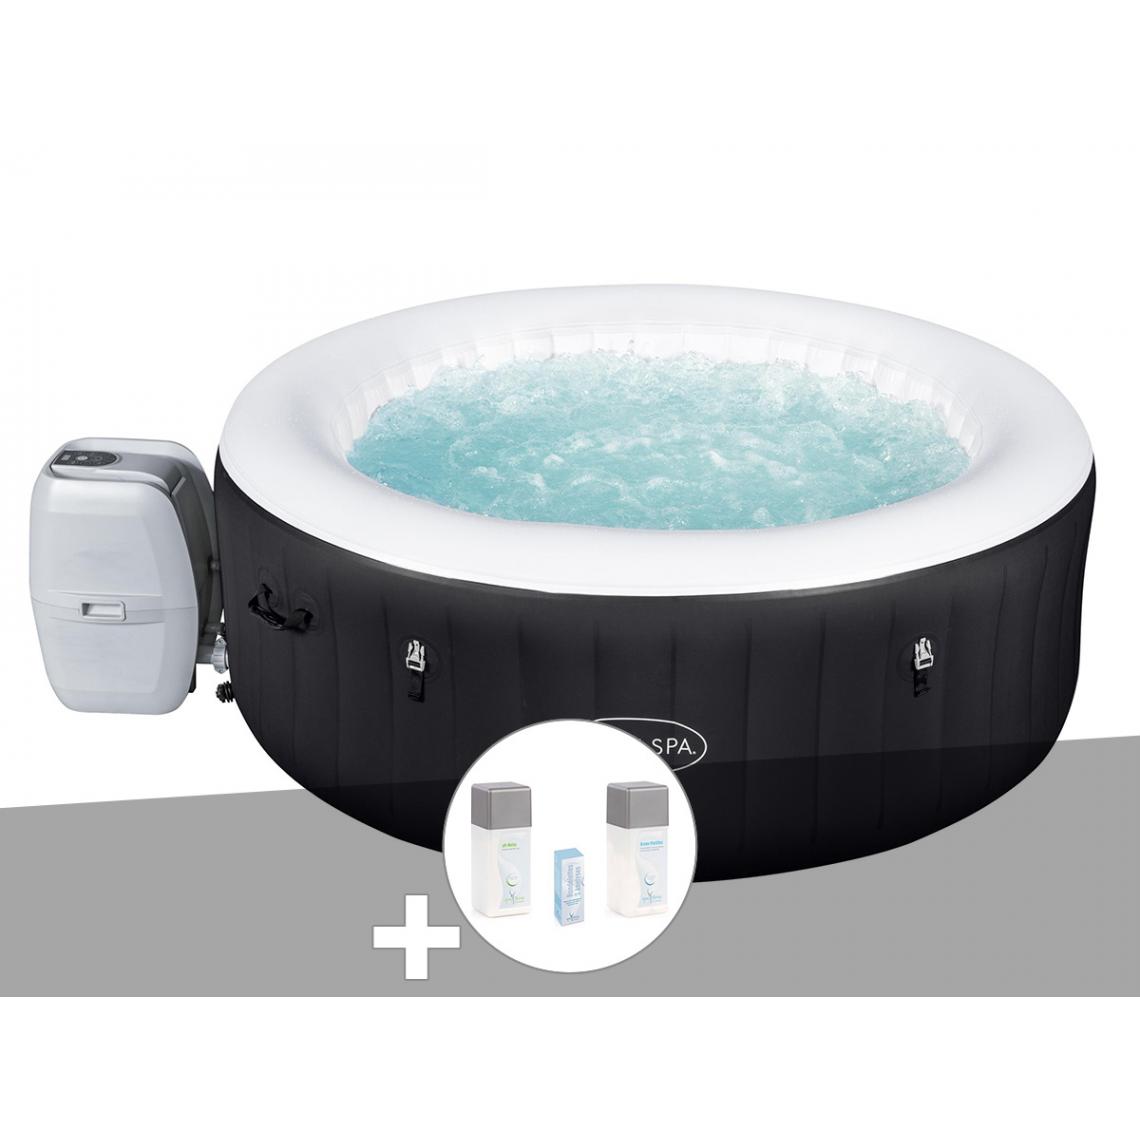 Bestway - Kit spa gonflable Bestway Lay-Z-Spa Miami rond Airjet 4 places + Kit traitement brome - Spa gonflable